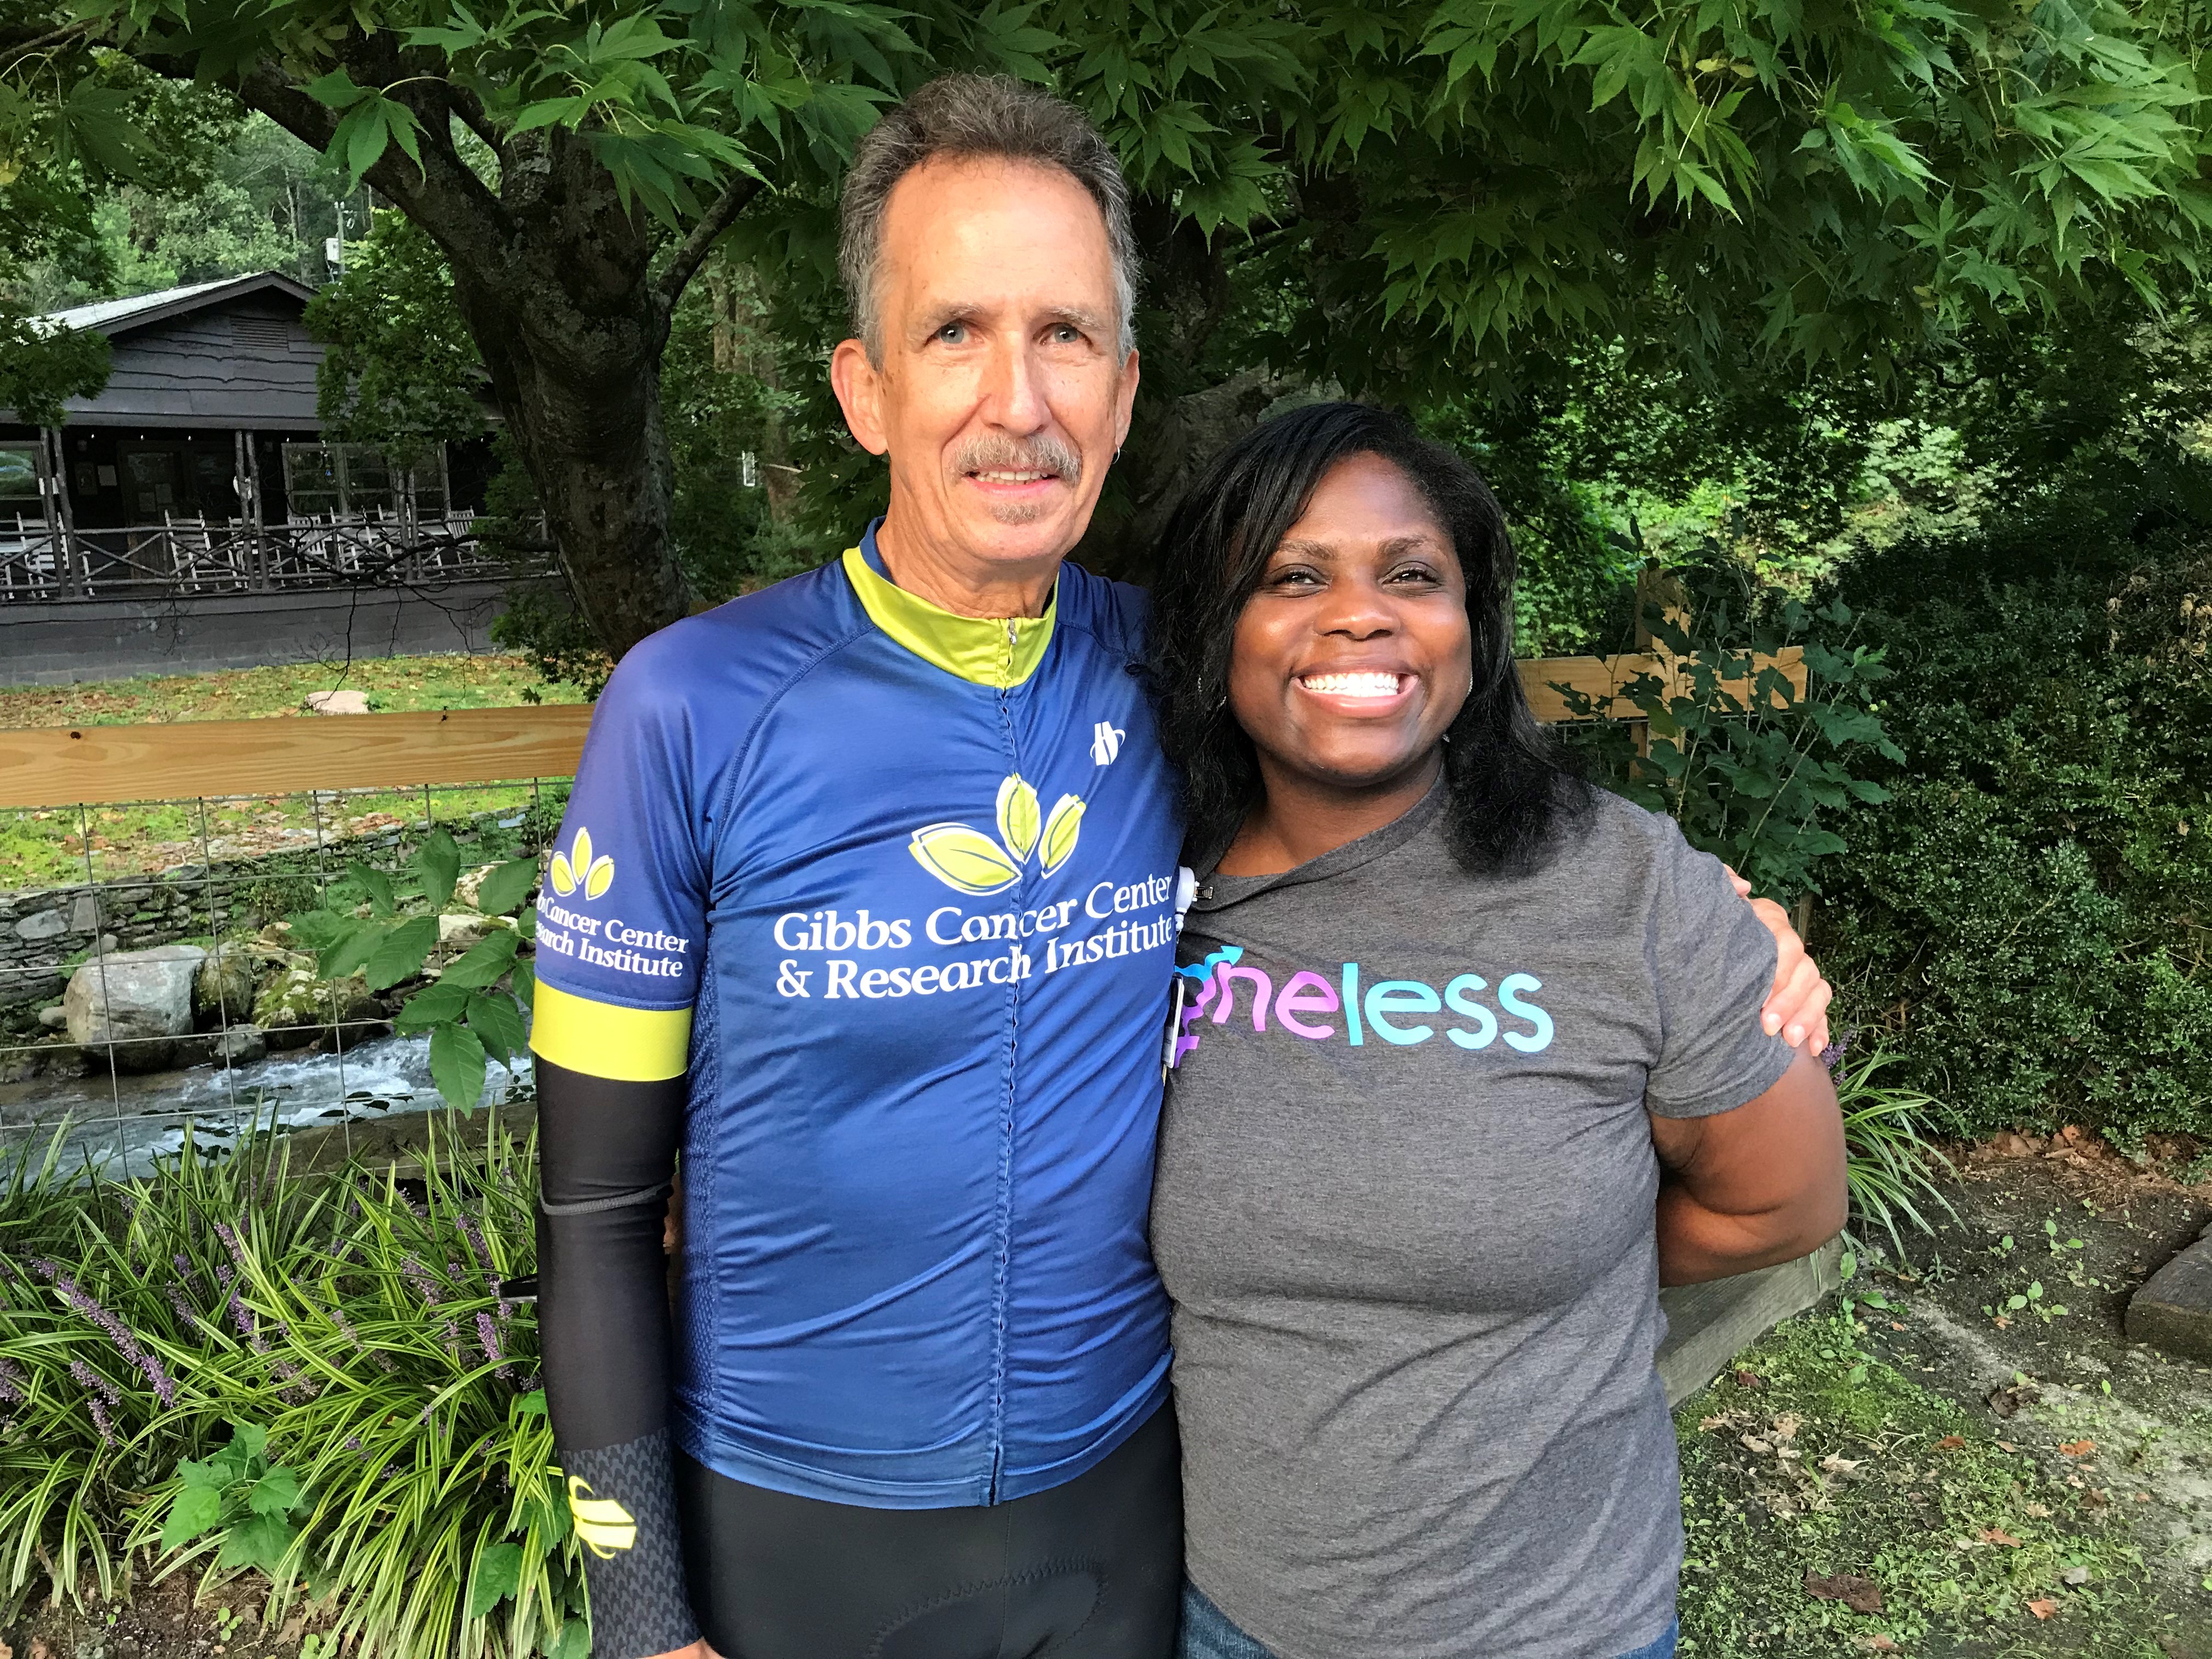 Cyclists support programs for cancer survivors